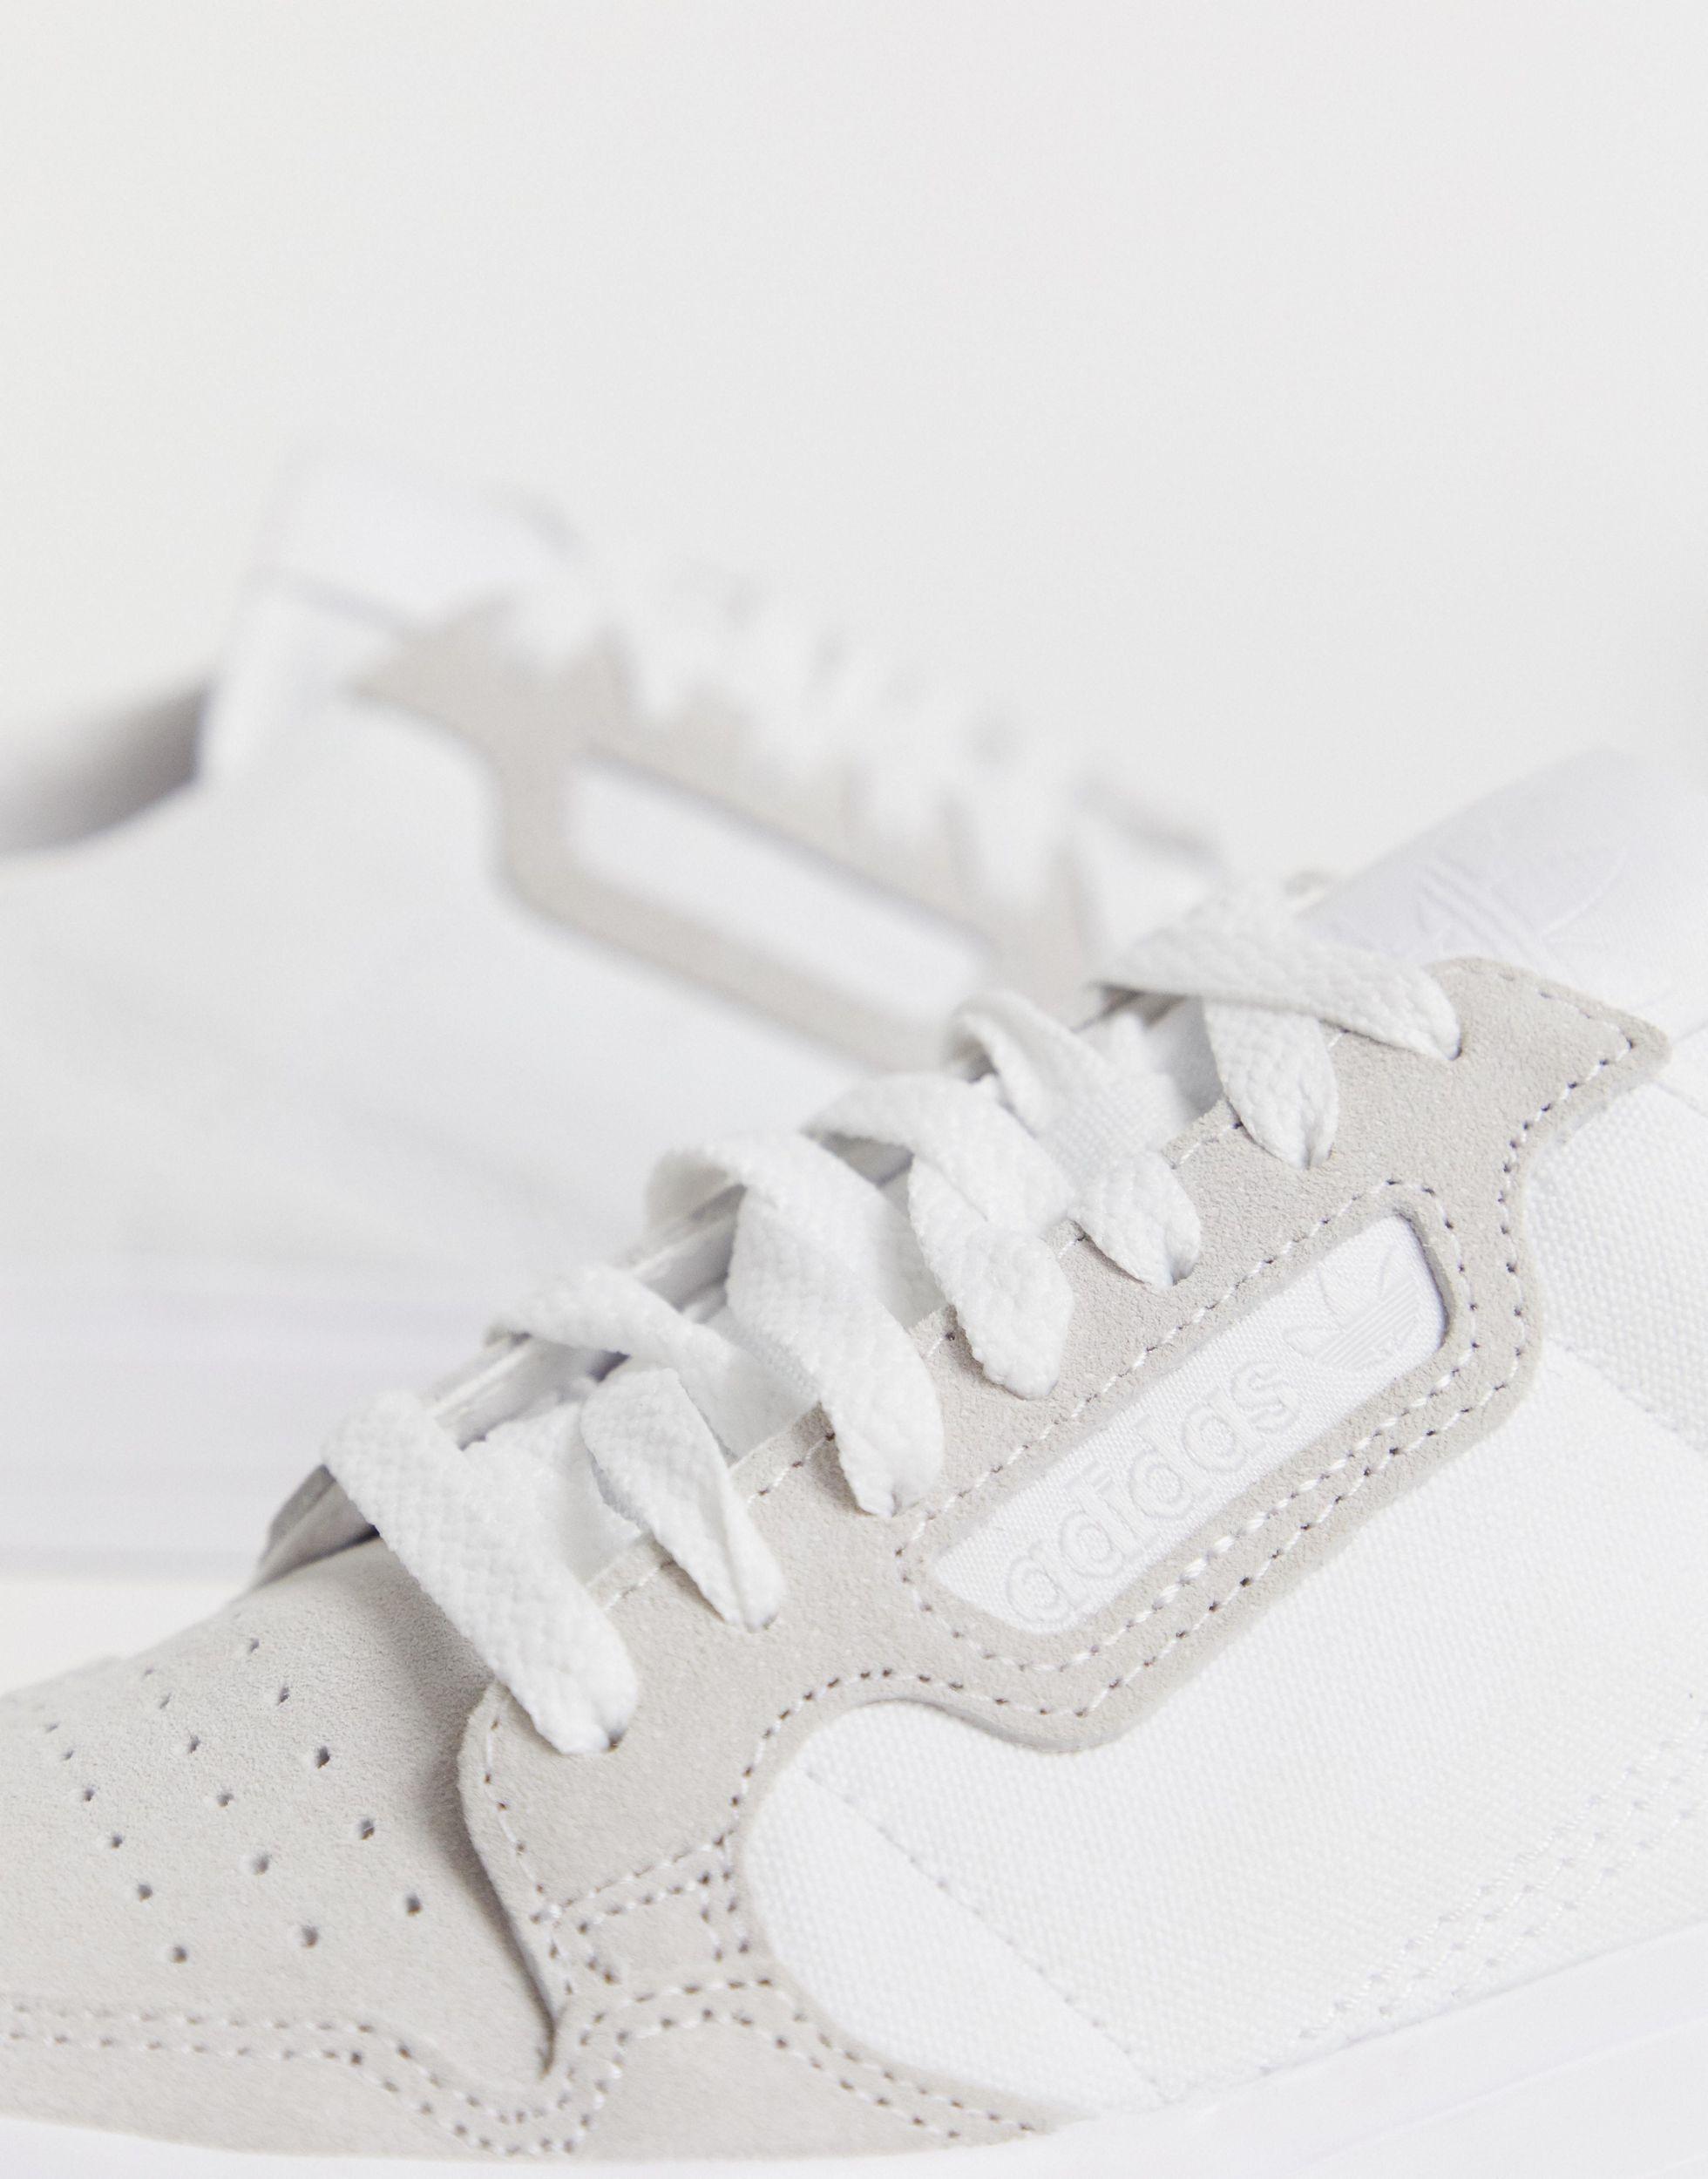 adidas Originals Continental 80 Vulc Trainers in White | Lyst